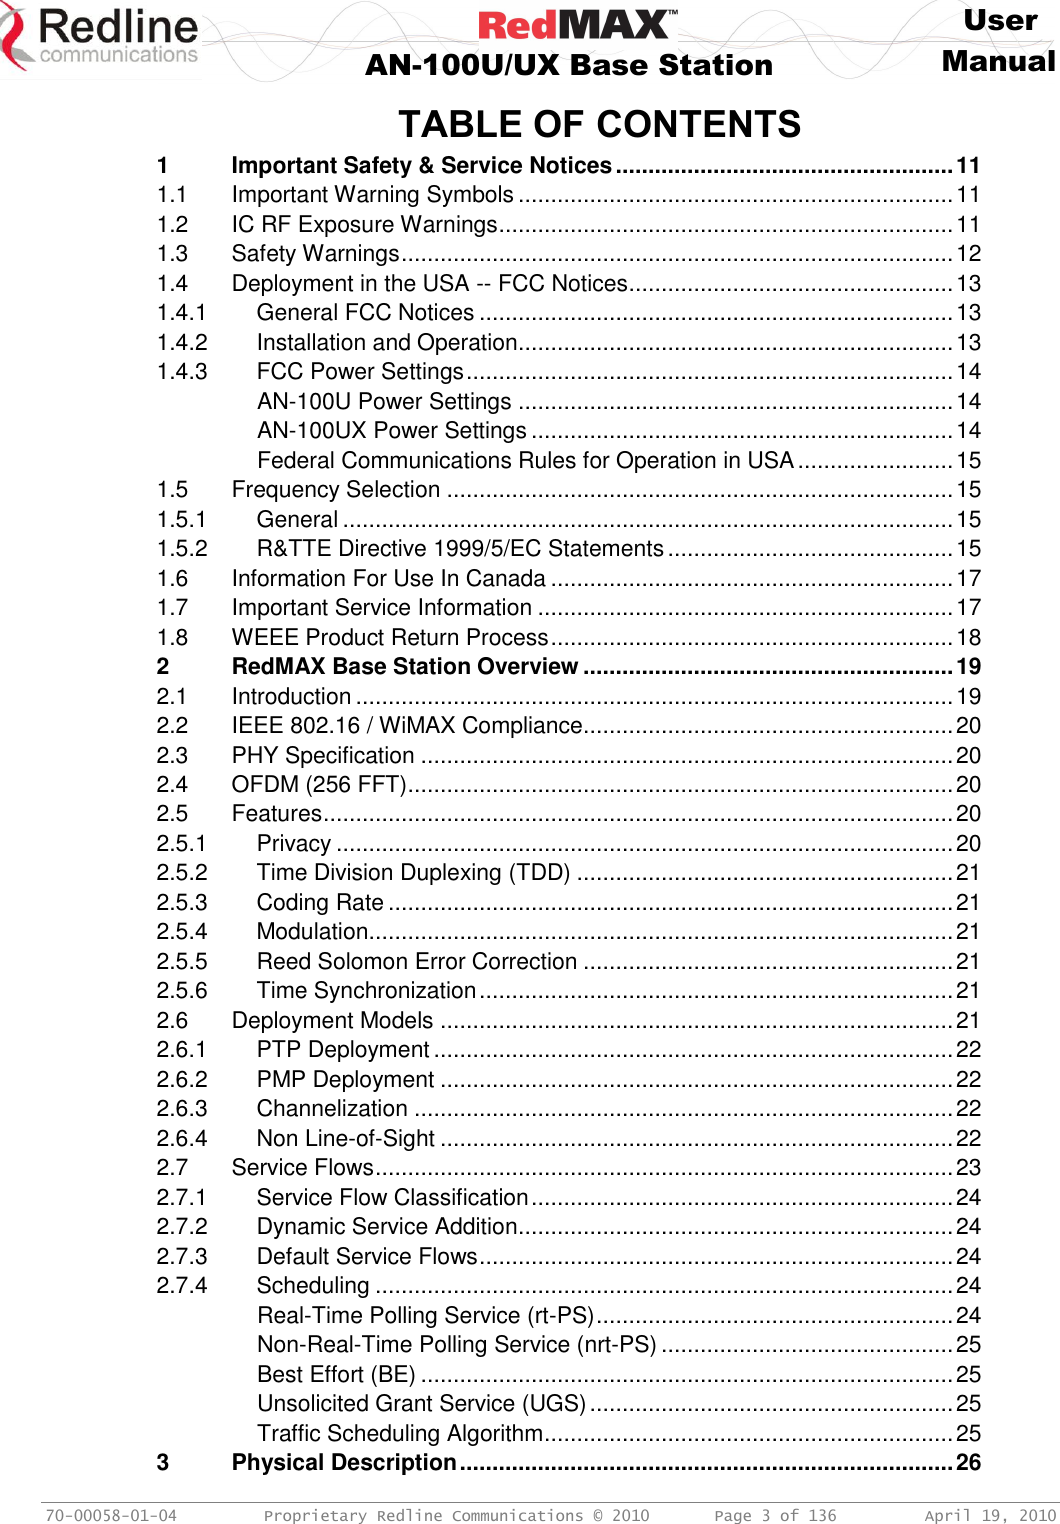     User  AN-100U/UX Base Station Manual   70-00058-01-04  Proprietary Redline Communications © 2010   Page 3 of 136  April 19, 2010 TABLE OF CONTENTS 1 Important Safety &amp; Service Notices .................................................... 11 1.1 Important Warning Symbols ................................................................... 11 1.2 IC RF Exposure Warnings ...................................................................... 11 1.3 Safety Warnings ..................................................................................... 12 1.4 Deployment in the USA -- FCC Notices .................................................. 13 1.4.1 General FCC Notices ......................................................................... 13 1.4.2 Installation and Operation ................................................................... 13 1.4.3 FCC Power Settings ........................................................................... 14 AN-100U Power Settings ................................................................... 14 AN-100UX Power Settings ................................................................. 14 Federal Communications Rules for Operation in USA ........................ 15 1.5 Frequency Selection .............................................................................. 15 1.5.1 General .............................................................................................. 15 1.5.2 R&amp;TTE Directive 1999/5/EC Statements ............................................ 15 1.6 Information For Use In Canada .............................................................. 17 1.7 Important Service Information ................................................................ 17 1.8 WEEE Product Return Process .............................................................. 18 2 RedMAX Base Station Overview ......................................................... 19 2.1 Introduction ............................................................................................ 19 2.2 IEEE 802.16 / WiMAX Compliance......................................................... 20 2.3 PHY Specification .................................................................................. 20 2.4 OFDM (256 FFT) .................................................................................... 20 2.5 Features ................................................................................................. 20 2.5.1 Privacy ............................................................................................... 20 2.5.2 Time Division Duplexing (TDD) .......................................................... 21 2.5.3 Coding Rate ....................................................................................... 21 2.5.4 Modulation.......................................................................................... 21 2.5.5 Reed Solomon Error Correction ......................................................... 21 2.5.6 Time Synchronization ......................................................................... 21 2.6 Deployment Models ............................................................................... 21 2.6.1 PTP Deployment ................................................................................ 22 2.6.2 PMP Deployment ............................................................................... 22 2.6.3 Channelization ................................................................................... 22 2.6.4 Non Line-of-Sight ............................................................................... 22 2.7 Service Flows ......................................................................................... 23 2.7.1 Service Flow Classification ................................................................. 24 2.7.2 Dynamic Service Addition ................................................................... 24 2.7.3 Default Service Flows ......................................................................... 24 2.7.4 Scheduling ......................................................................................... 24 Real-Time Polling Service (rt-PS) ....................................................... 24 Non-Real-Time Polling Service (nrt-PS) ............................................. 25 Best Effort (BE) .................................................................................. 25 Unsolicited Grant Service (UGS) ........................................................ 25 Traffic Scheduling Algorithm ............................................................... 25 3 Physical Description ............................................................................ 26 